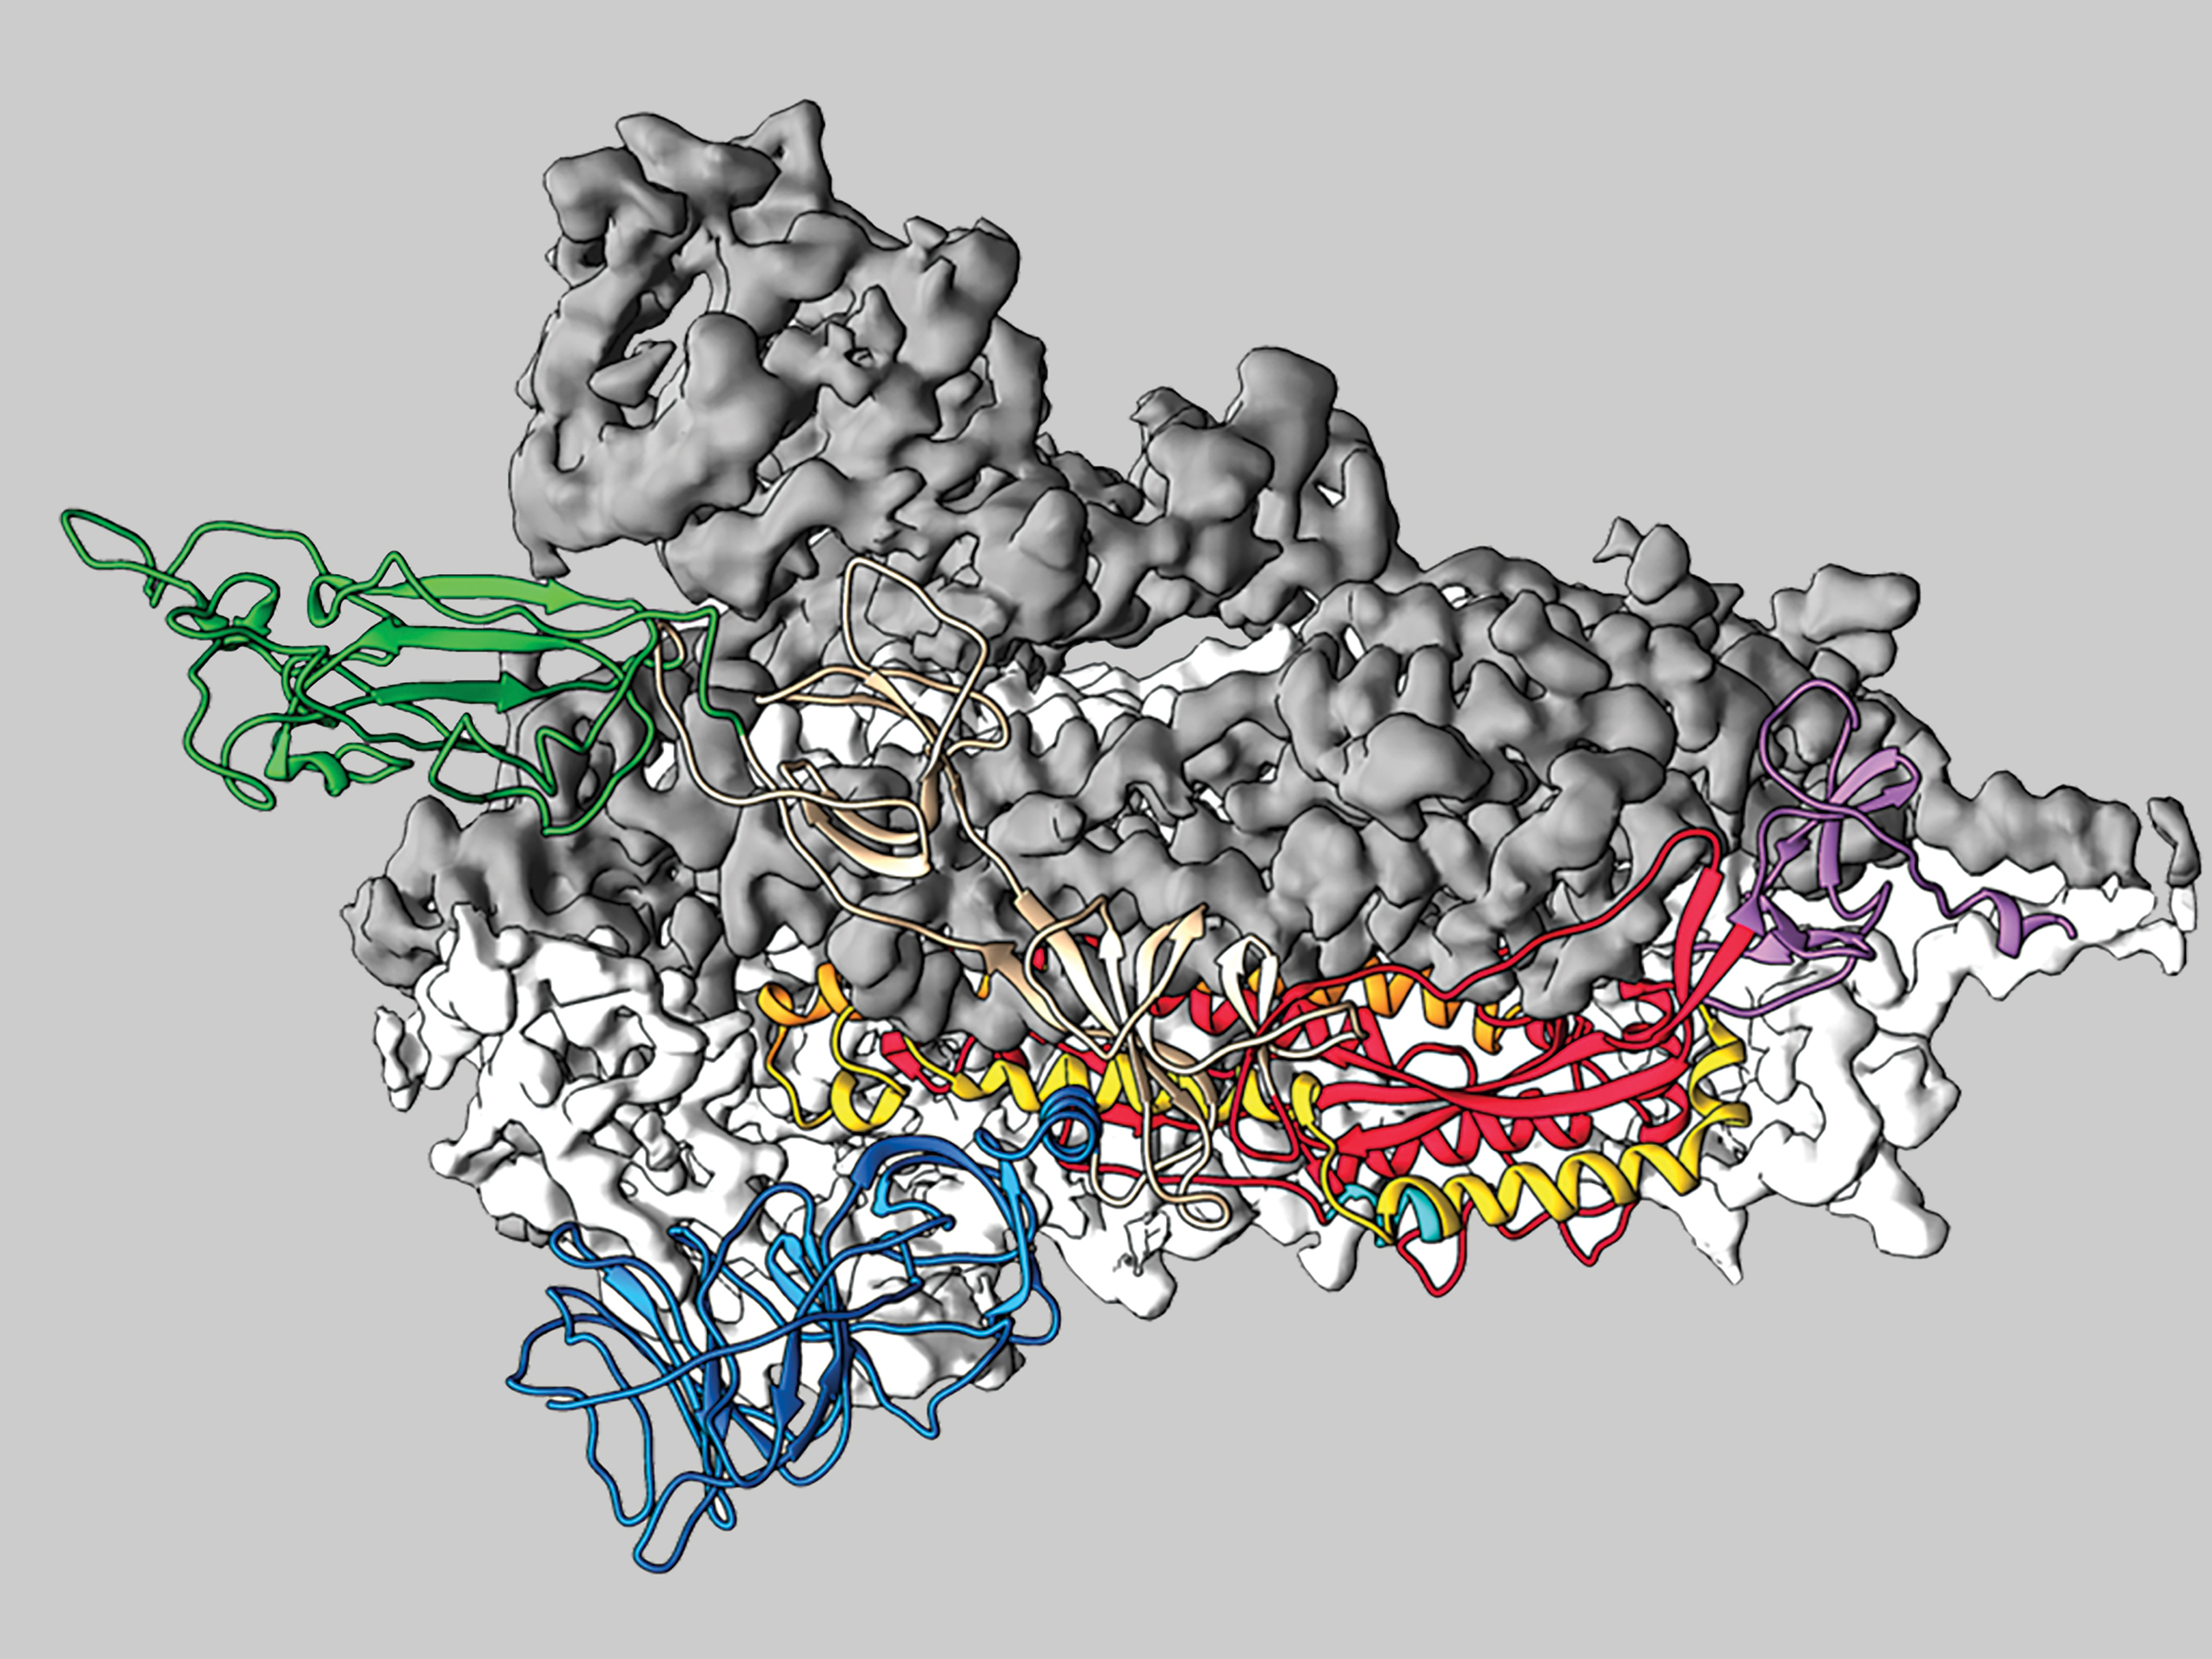 3-D model of SARS-CoV-2 spike protein